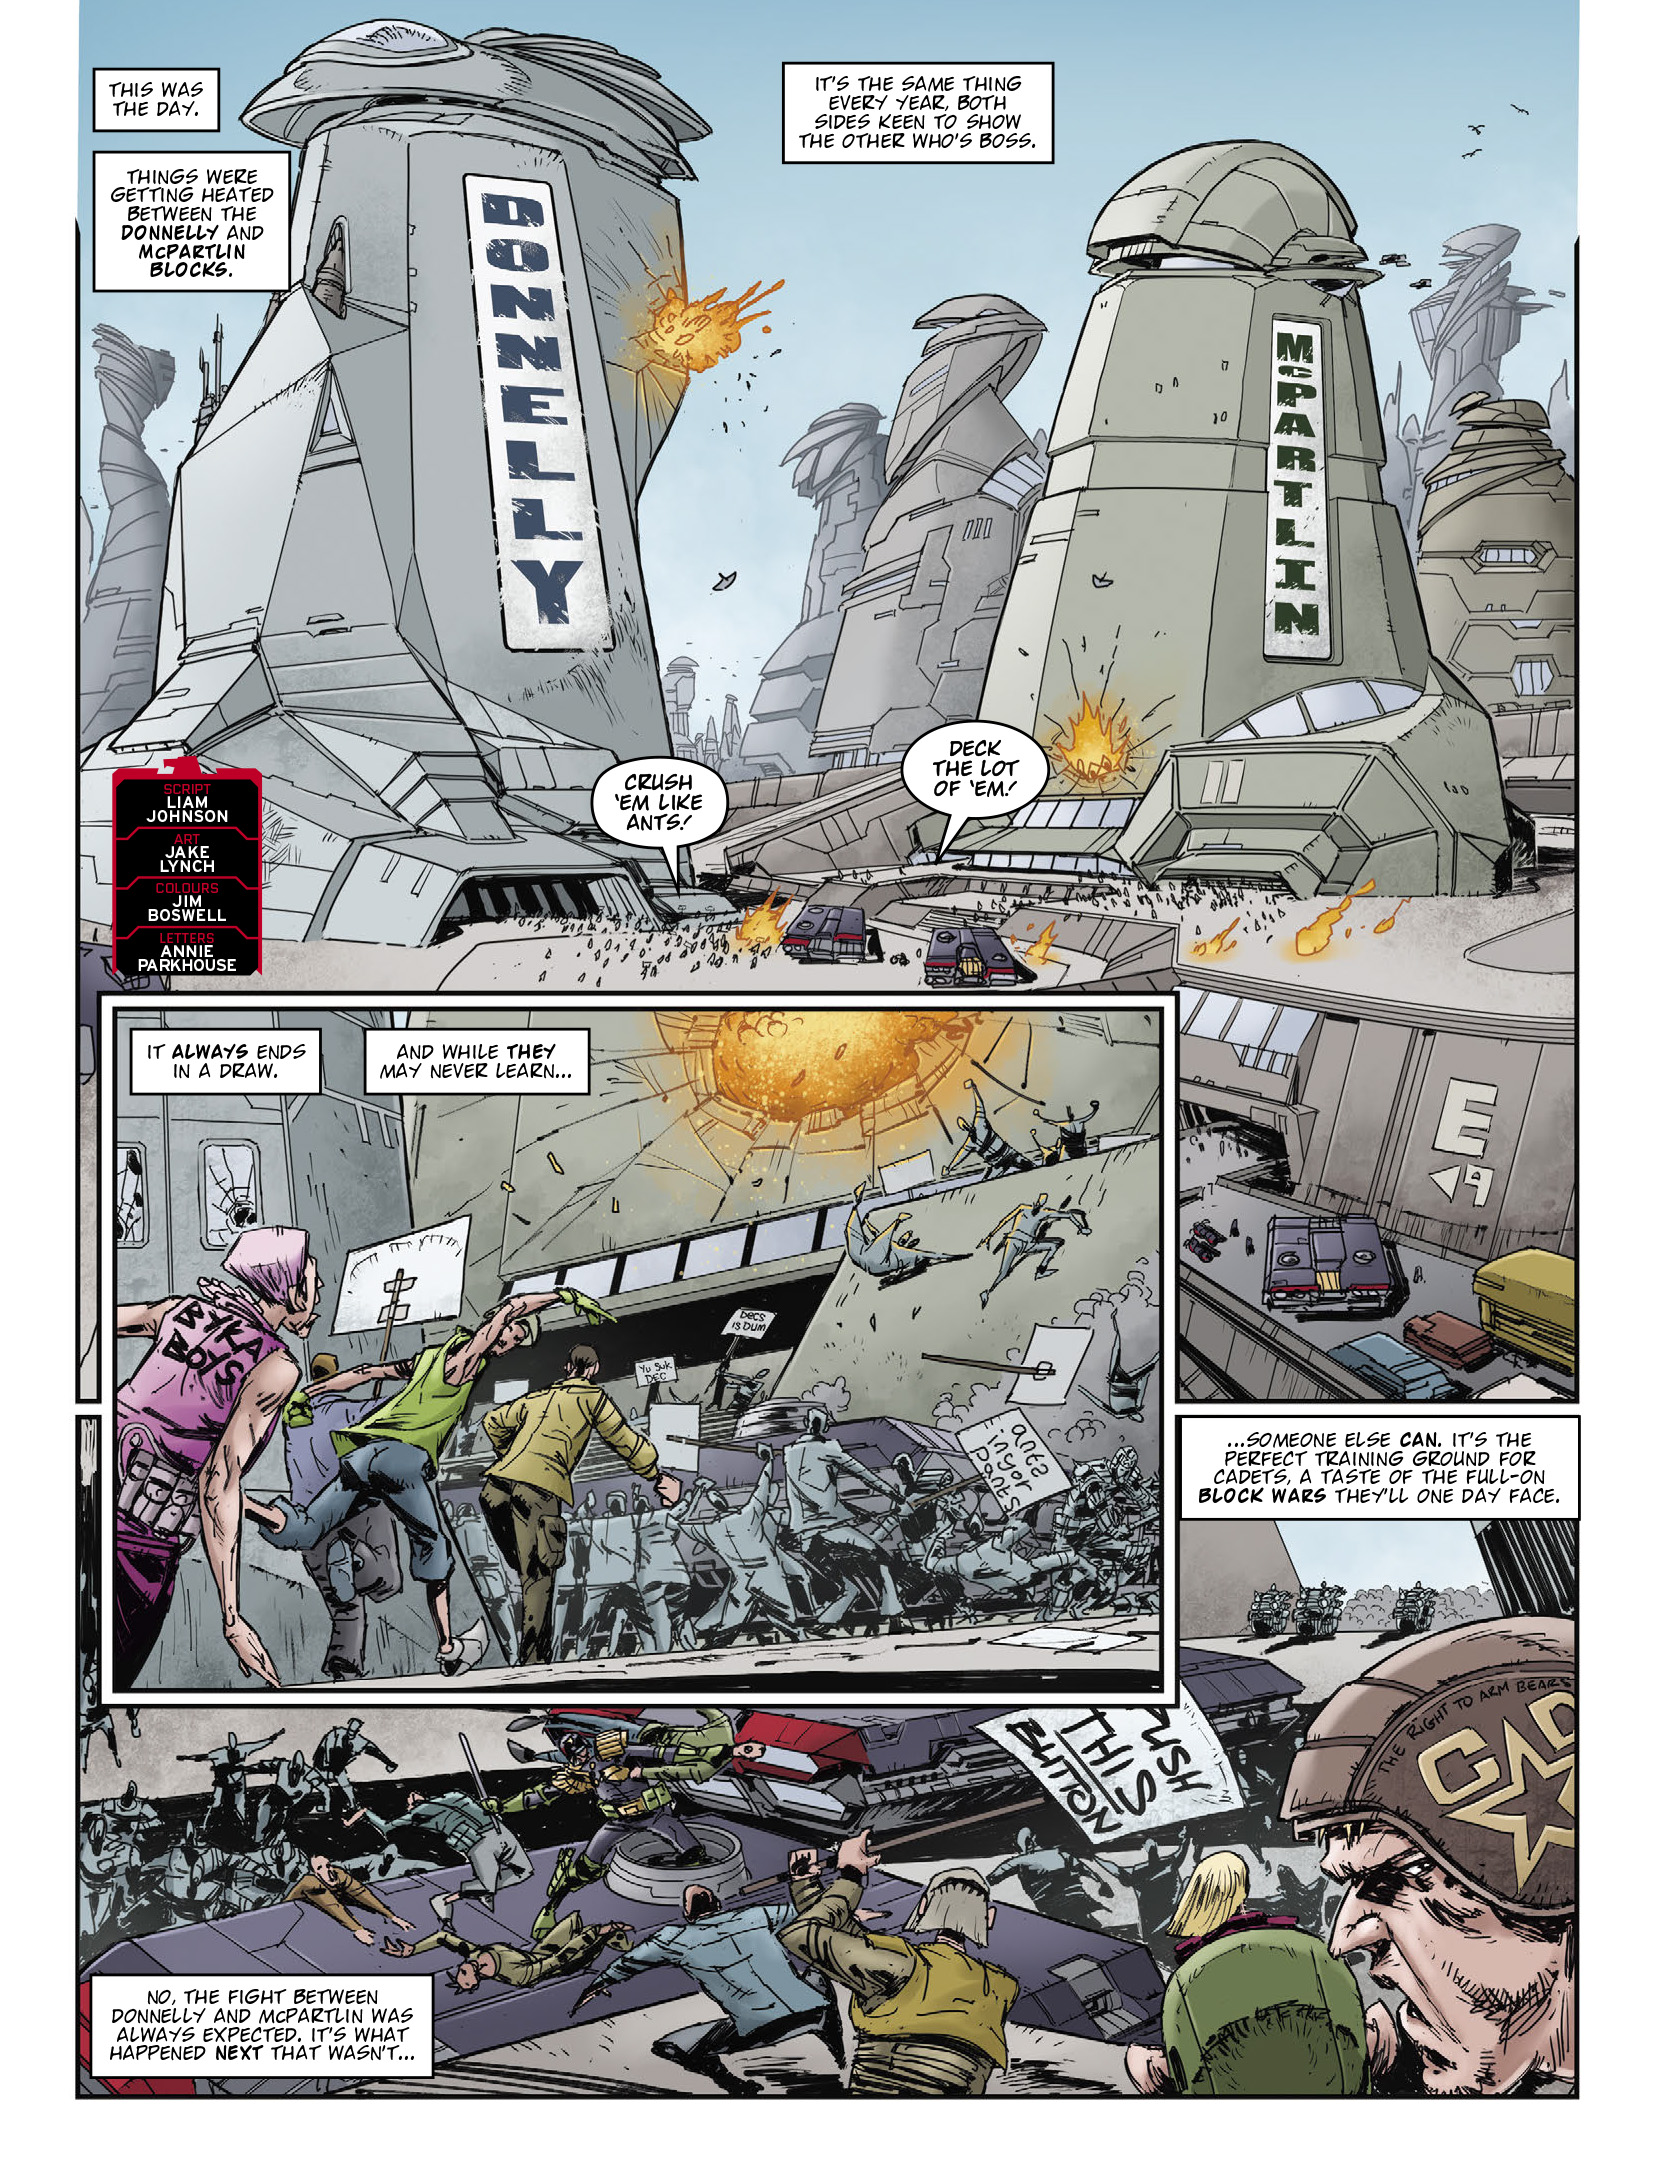 2000 AD: Chapter 2233 - Page 3